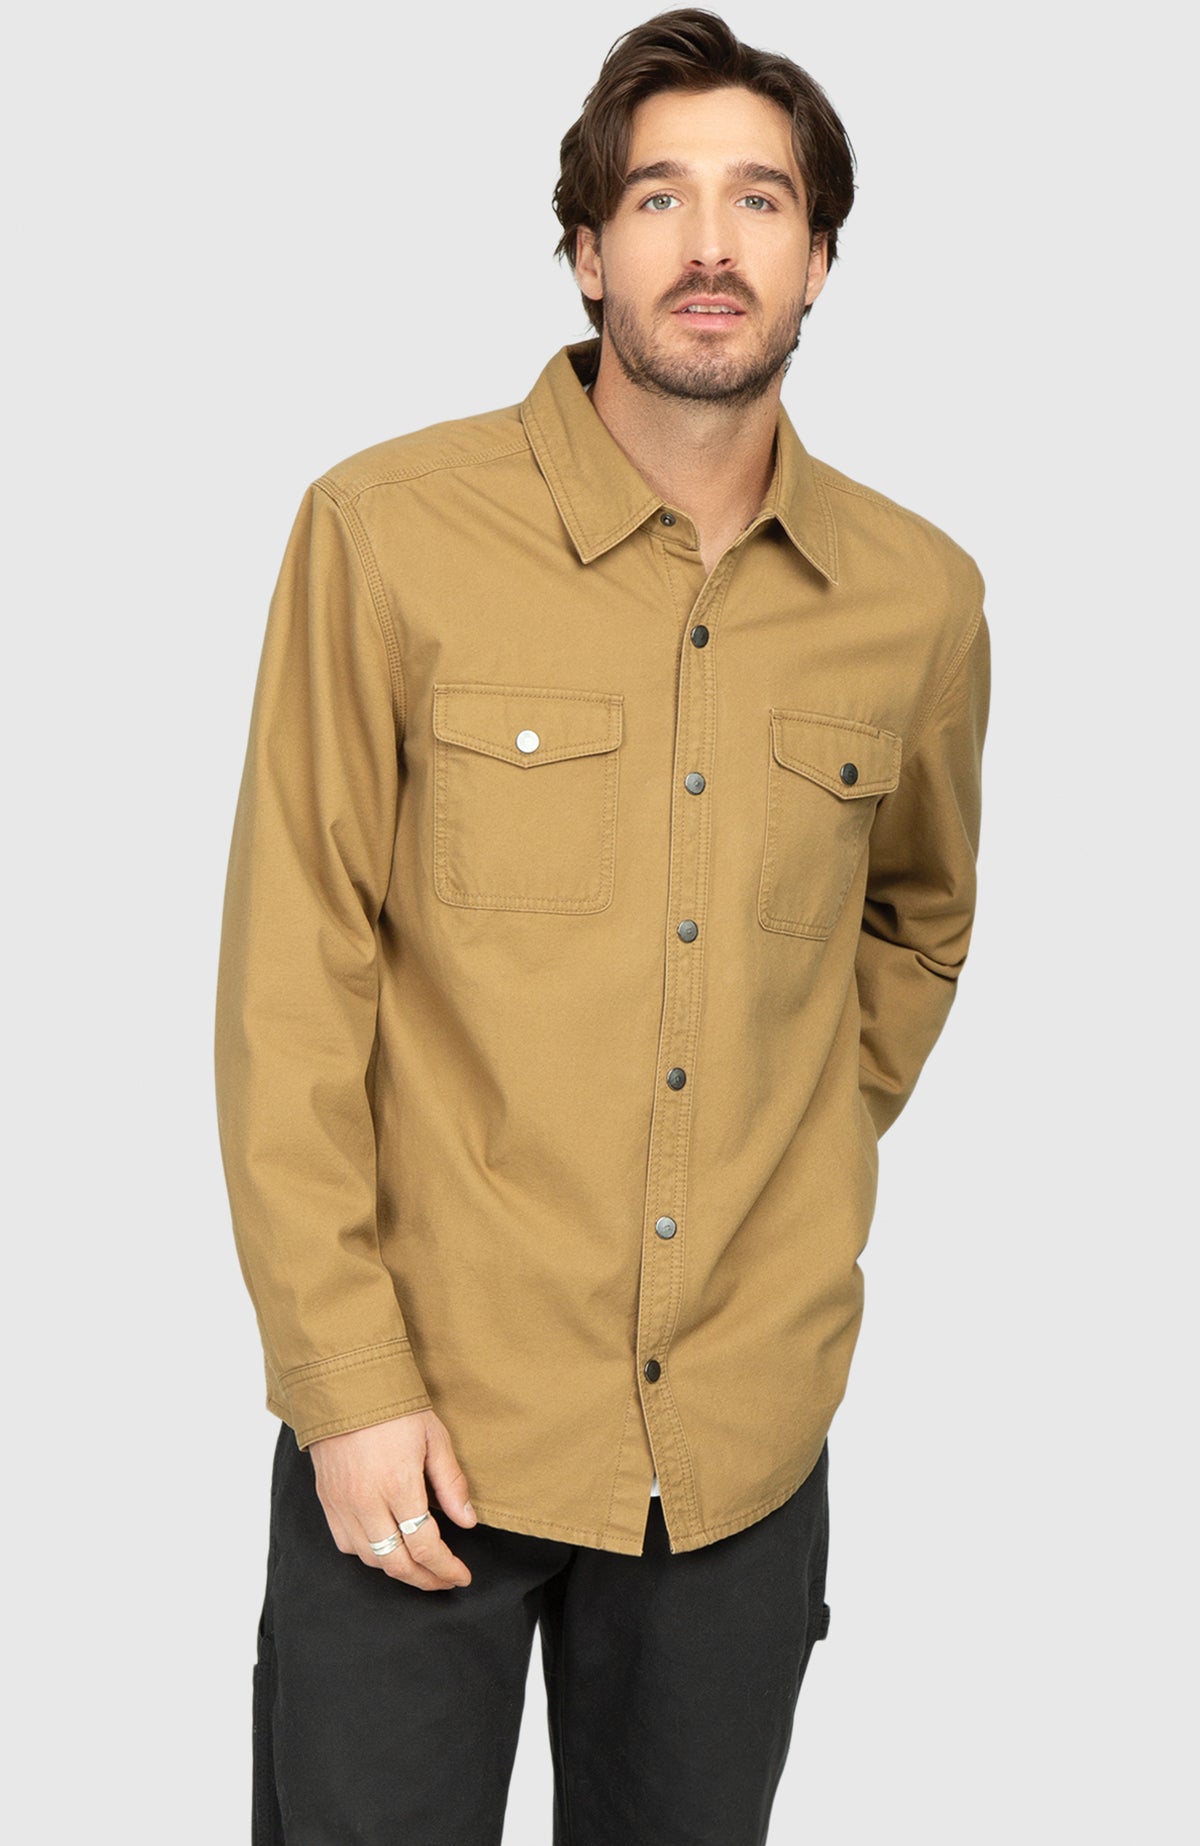 Camel Canvas Shirt Jacket - Front Buttoned Up